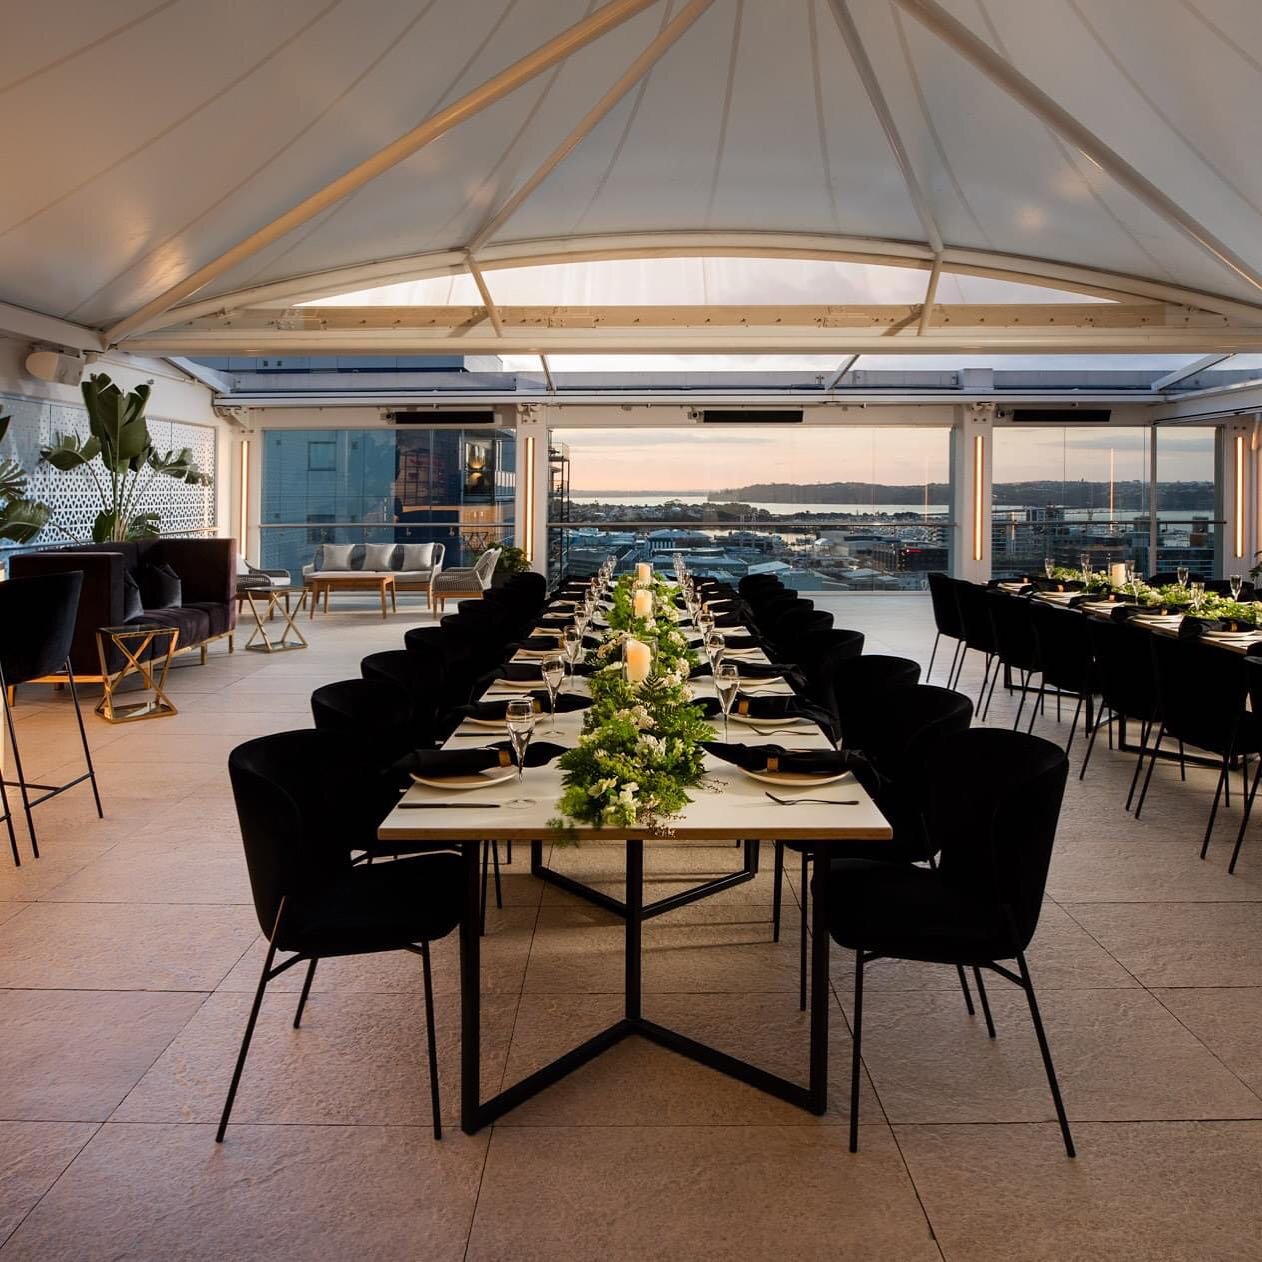 Rydges Auckland is offering an exclusive wedding viewing on their magnificent Rooftop Terrace including few treats to tickle your taste buds on Sunday 7th April ✨✨

So if you are in the market for the perfect Auckland venue to celebrate your marriage